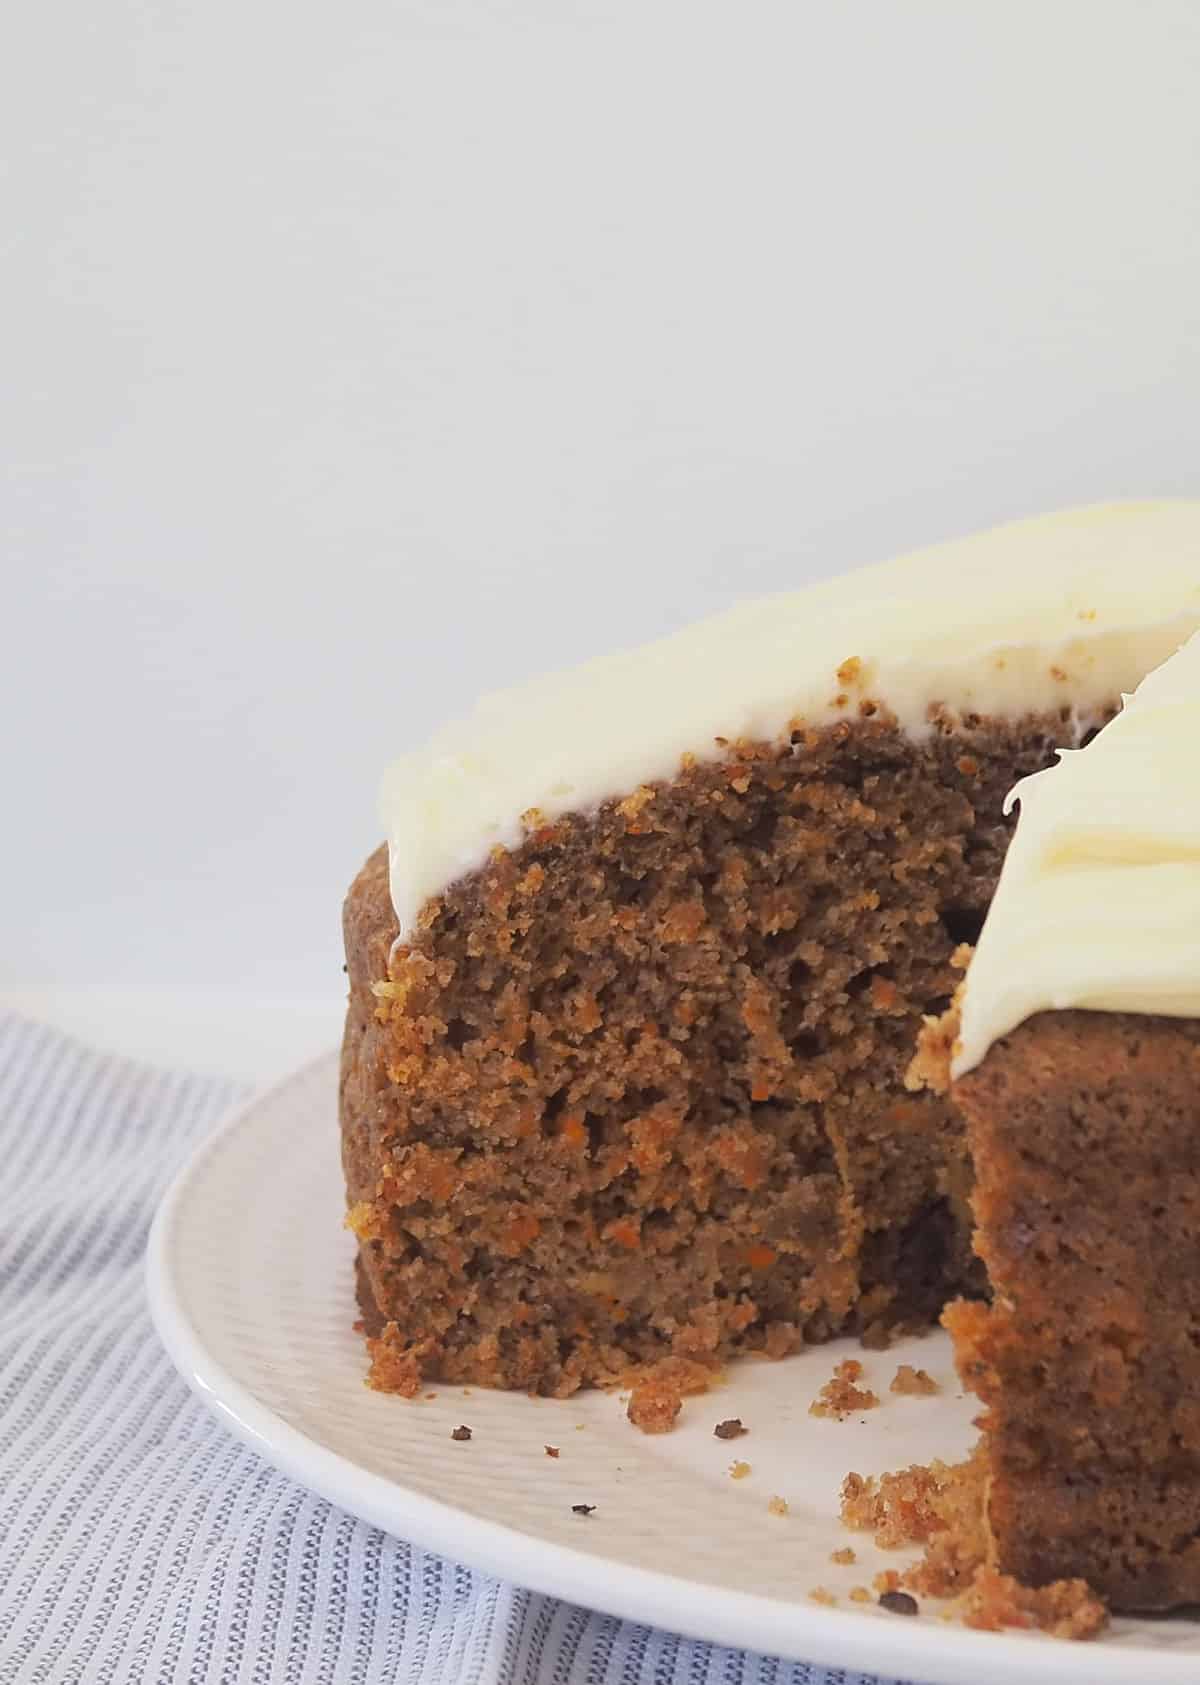 Whole Carrot Cake topped with cream cheese frosting with a pice removed, sitting on a white plate.